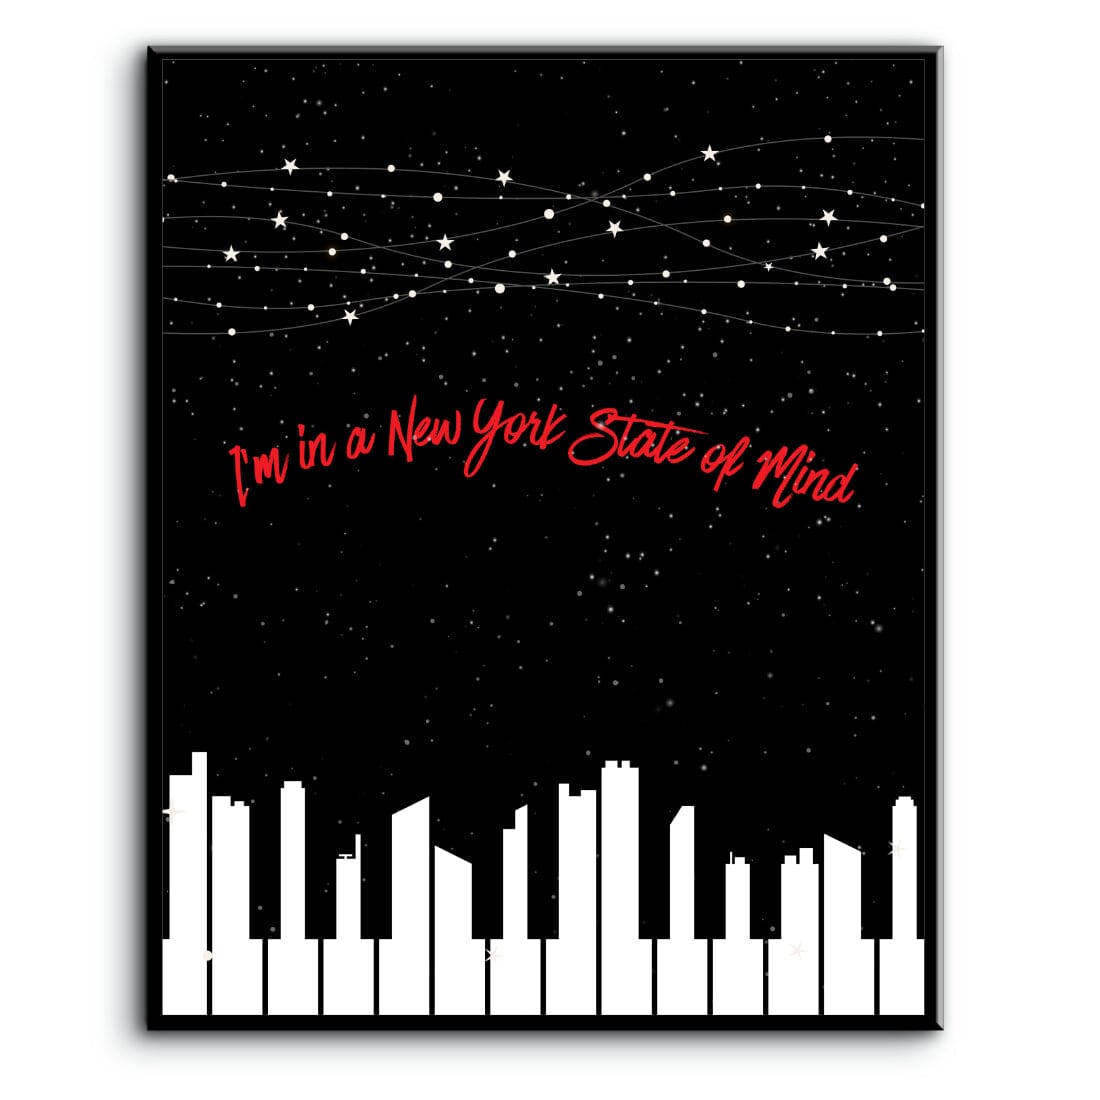 New York State of Mind by Billy Joel - Song Lyrics Art Print Song Lyrics Art Song Lyrics Art 8x10 Plaque Mount 